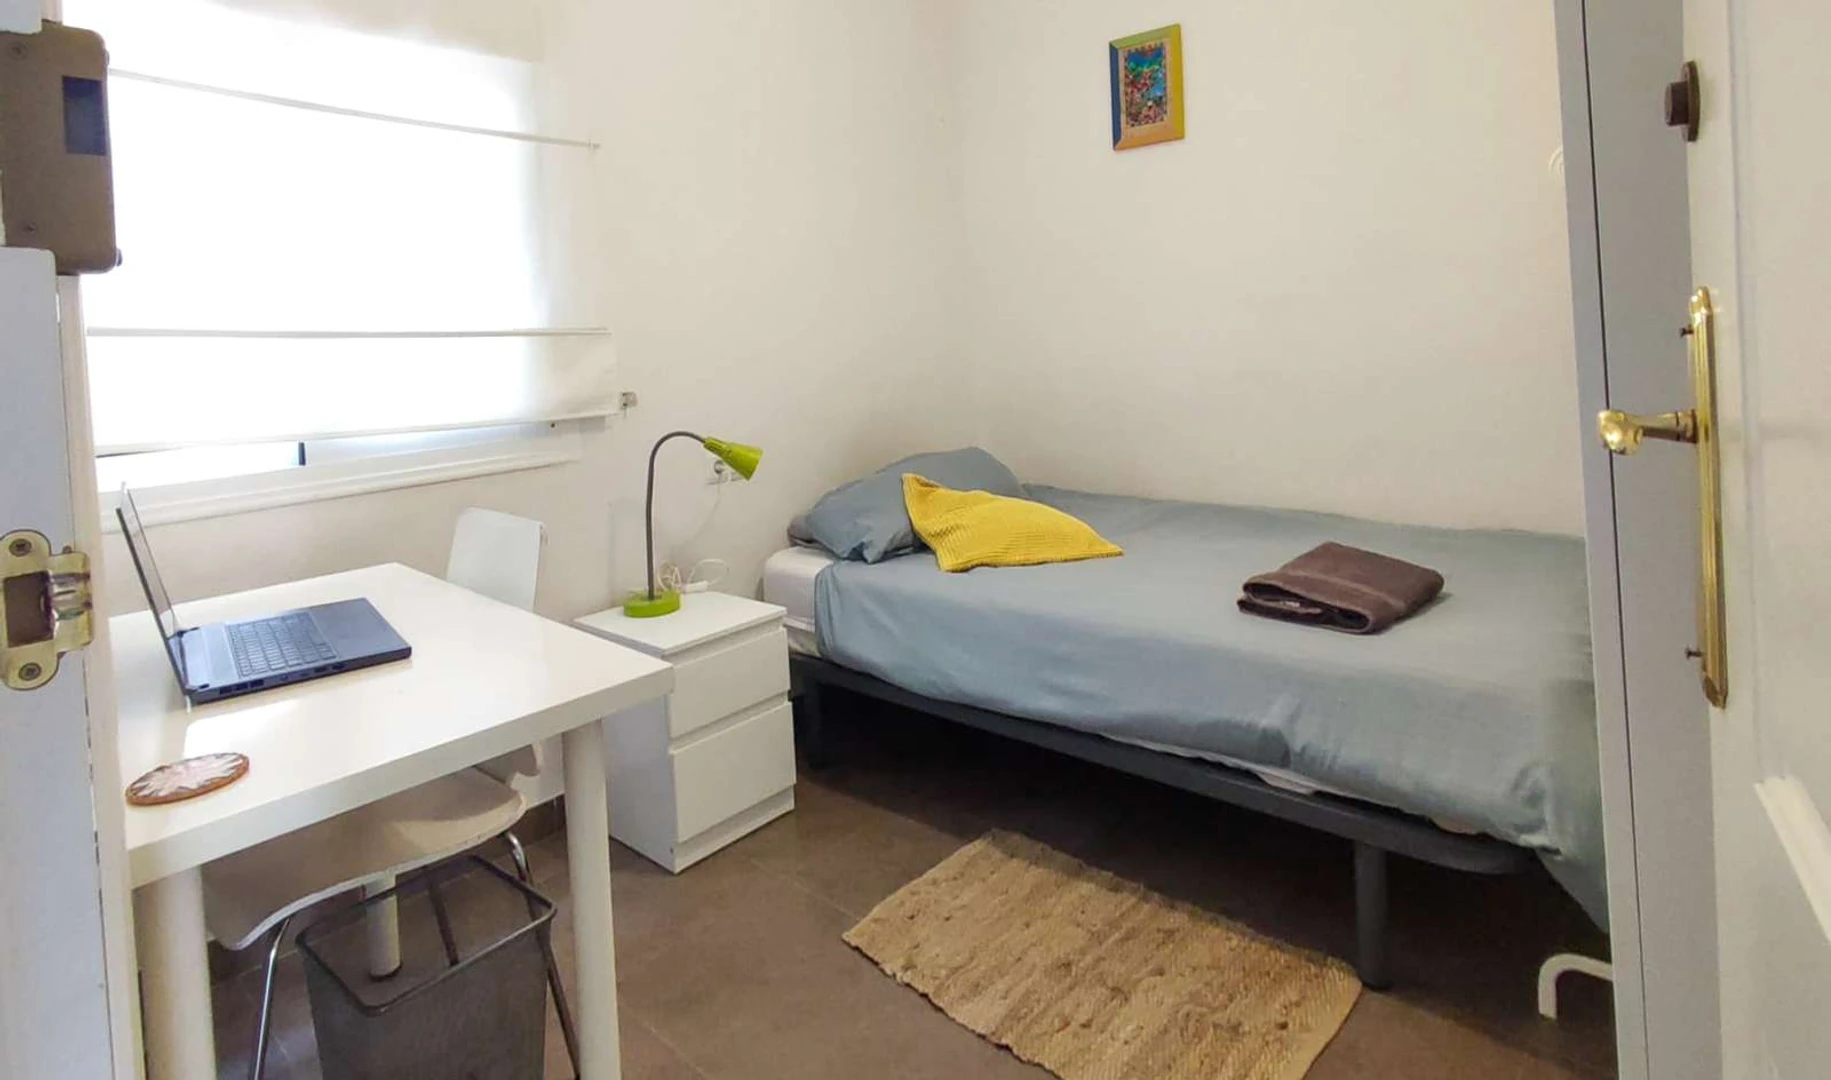 Room for rent in a shared flat in Malaga